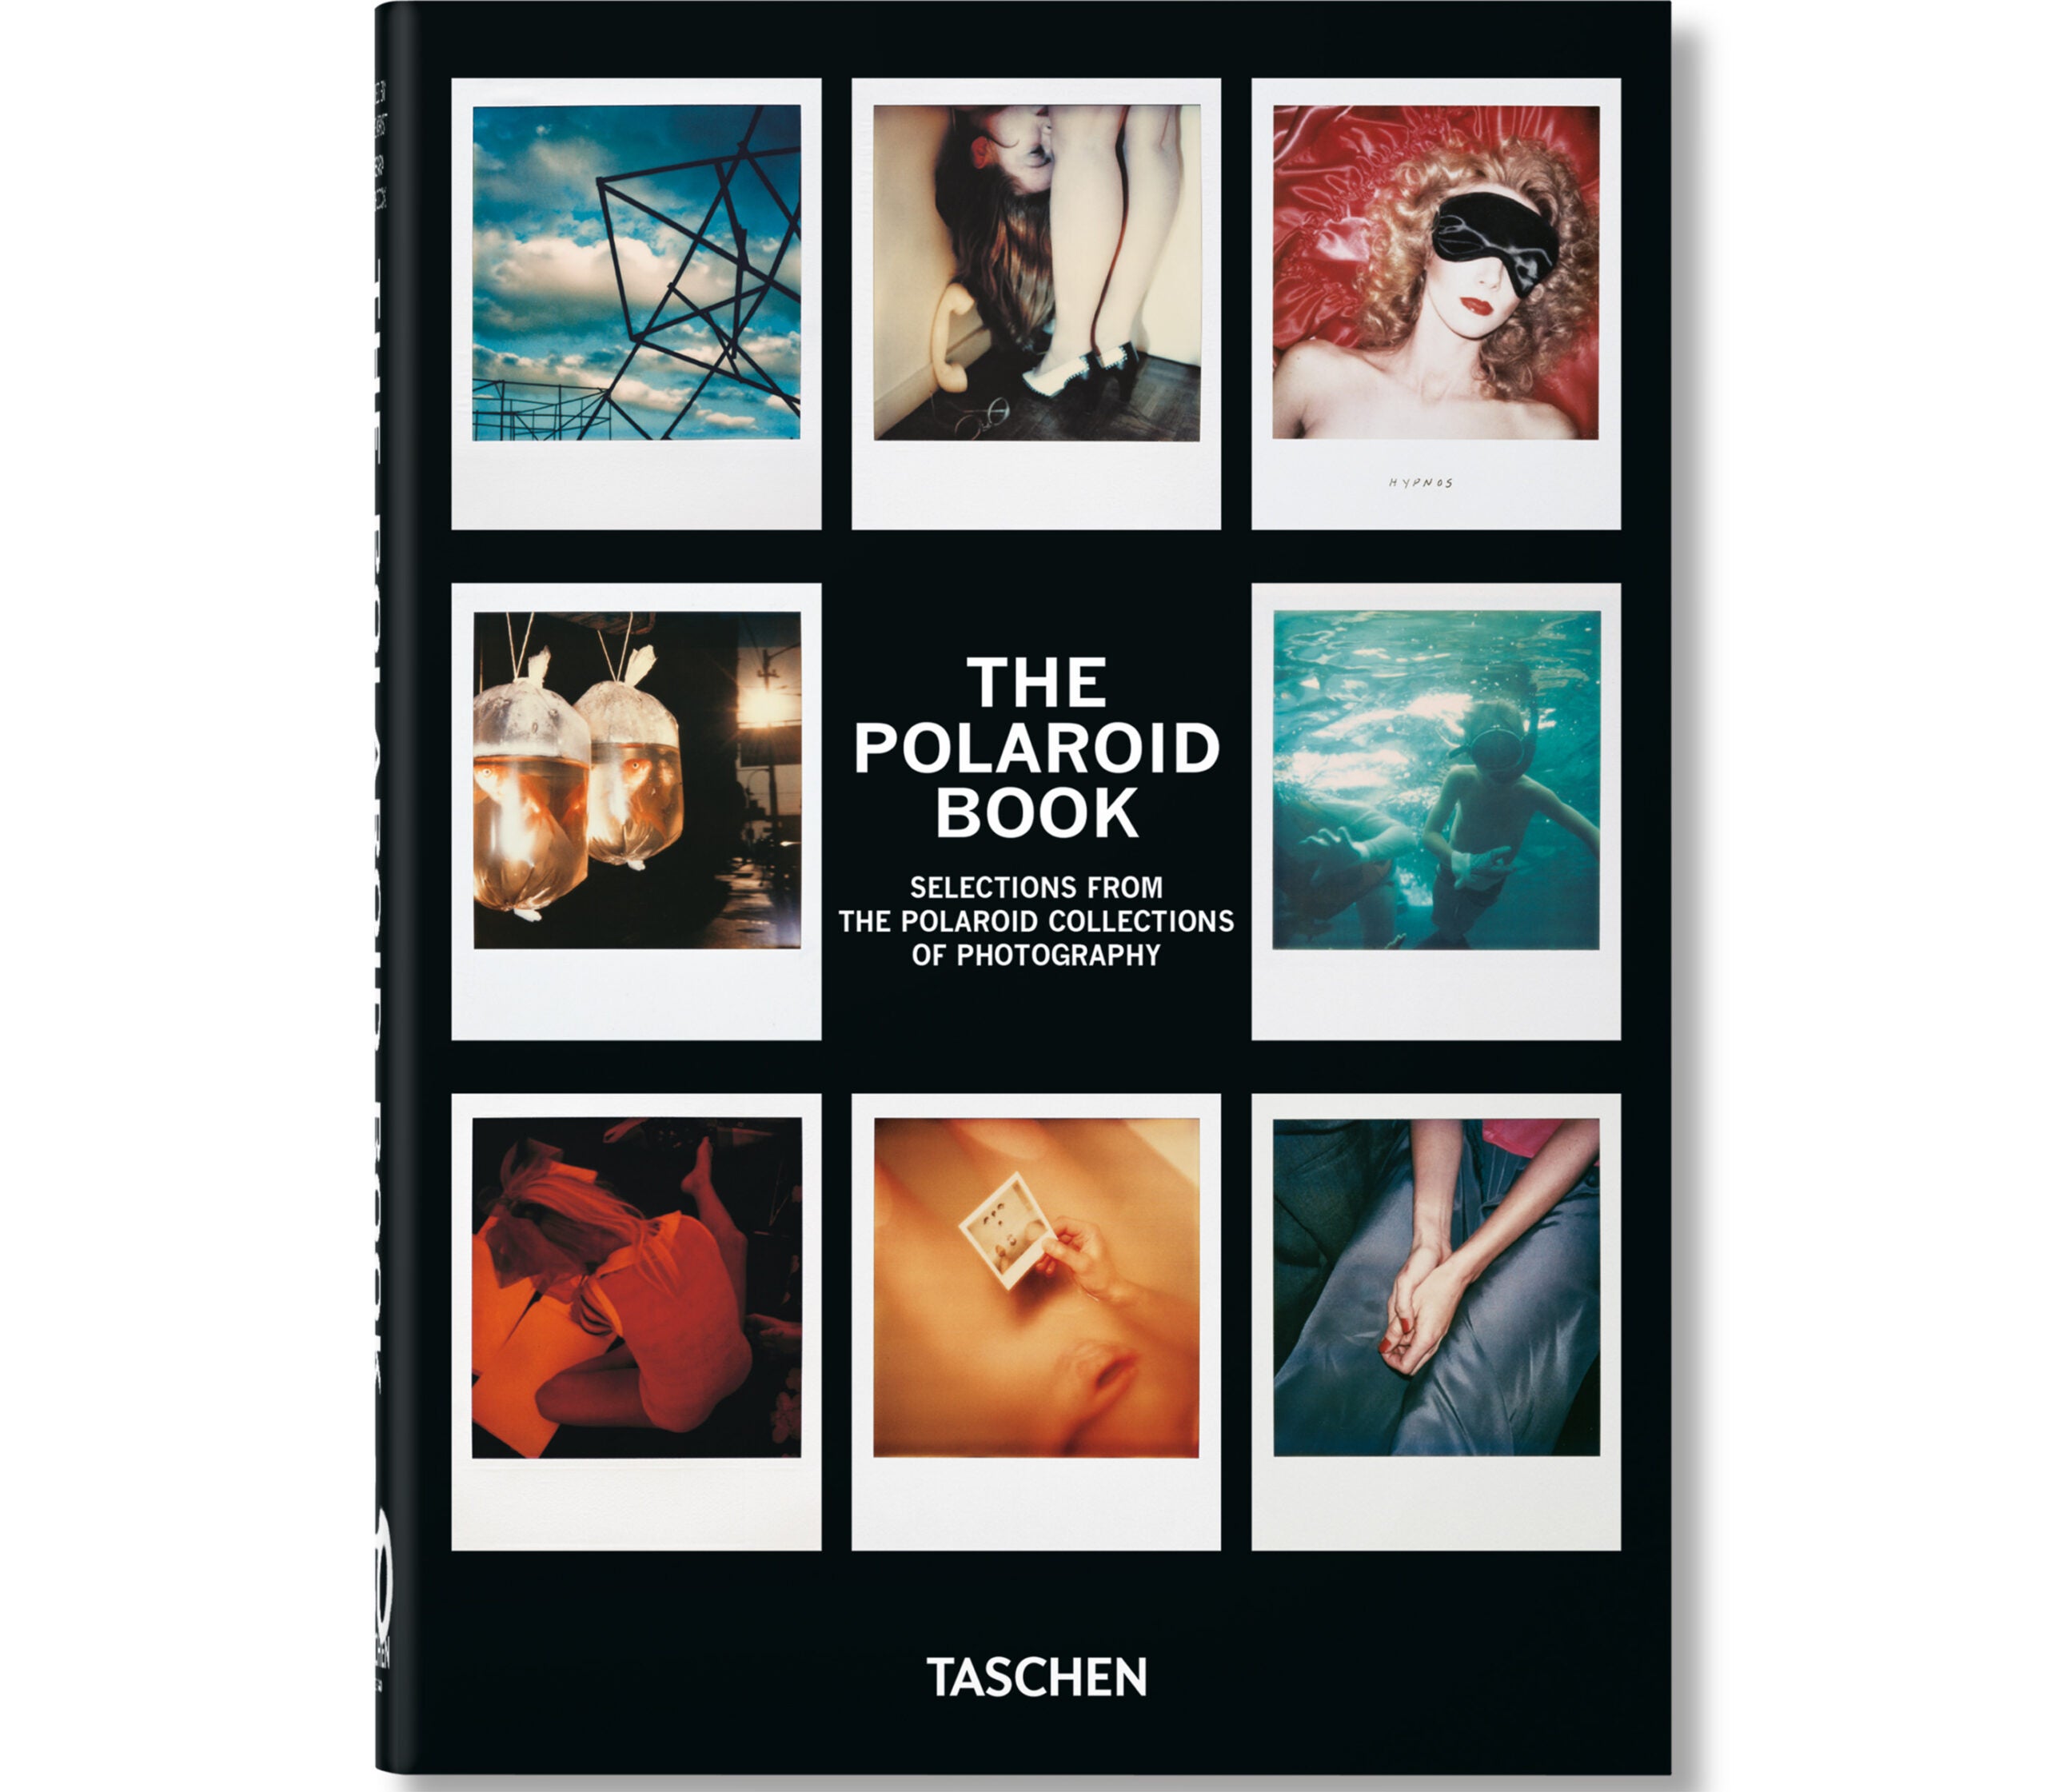 The cover of The Polaroid Book. 40th Ed.